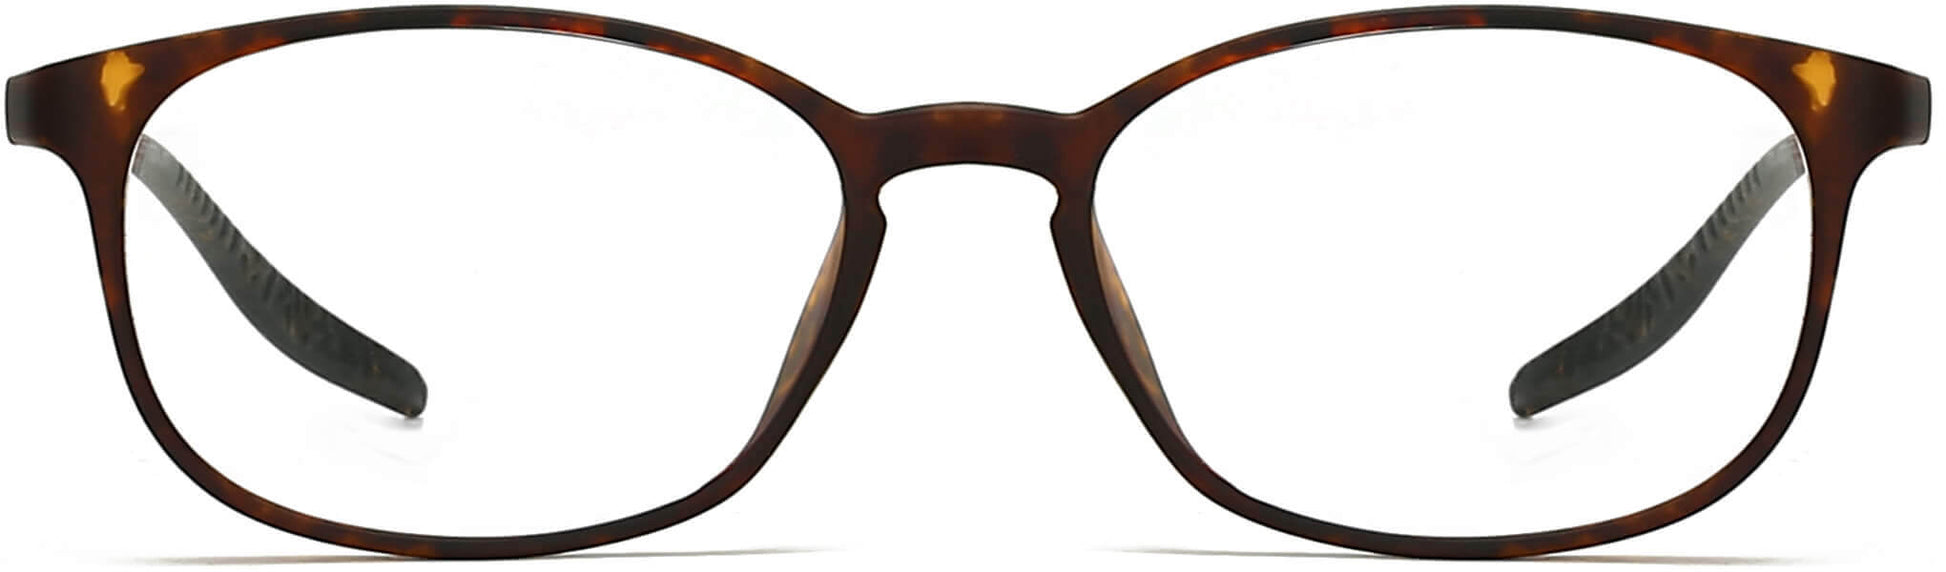 perrin-round-tortoise Eyeglasses from ANRRI, front view